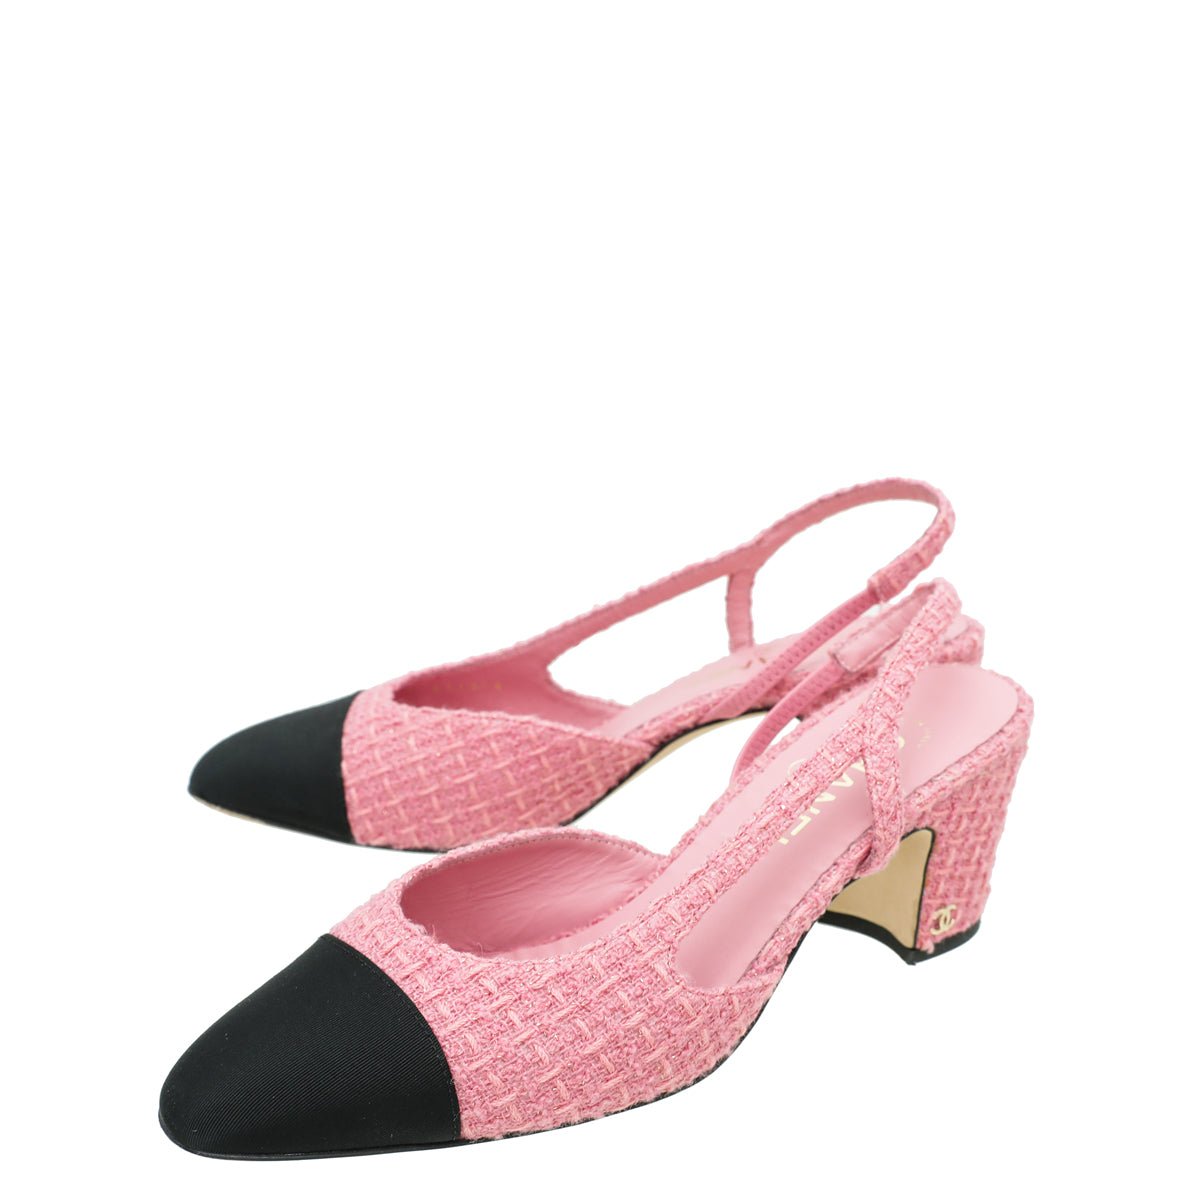 Chanel Slingback Pumps Pink Tweed with Black Toe Size 39 New in Box  WA001  Julia Rose Boston  Shop